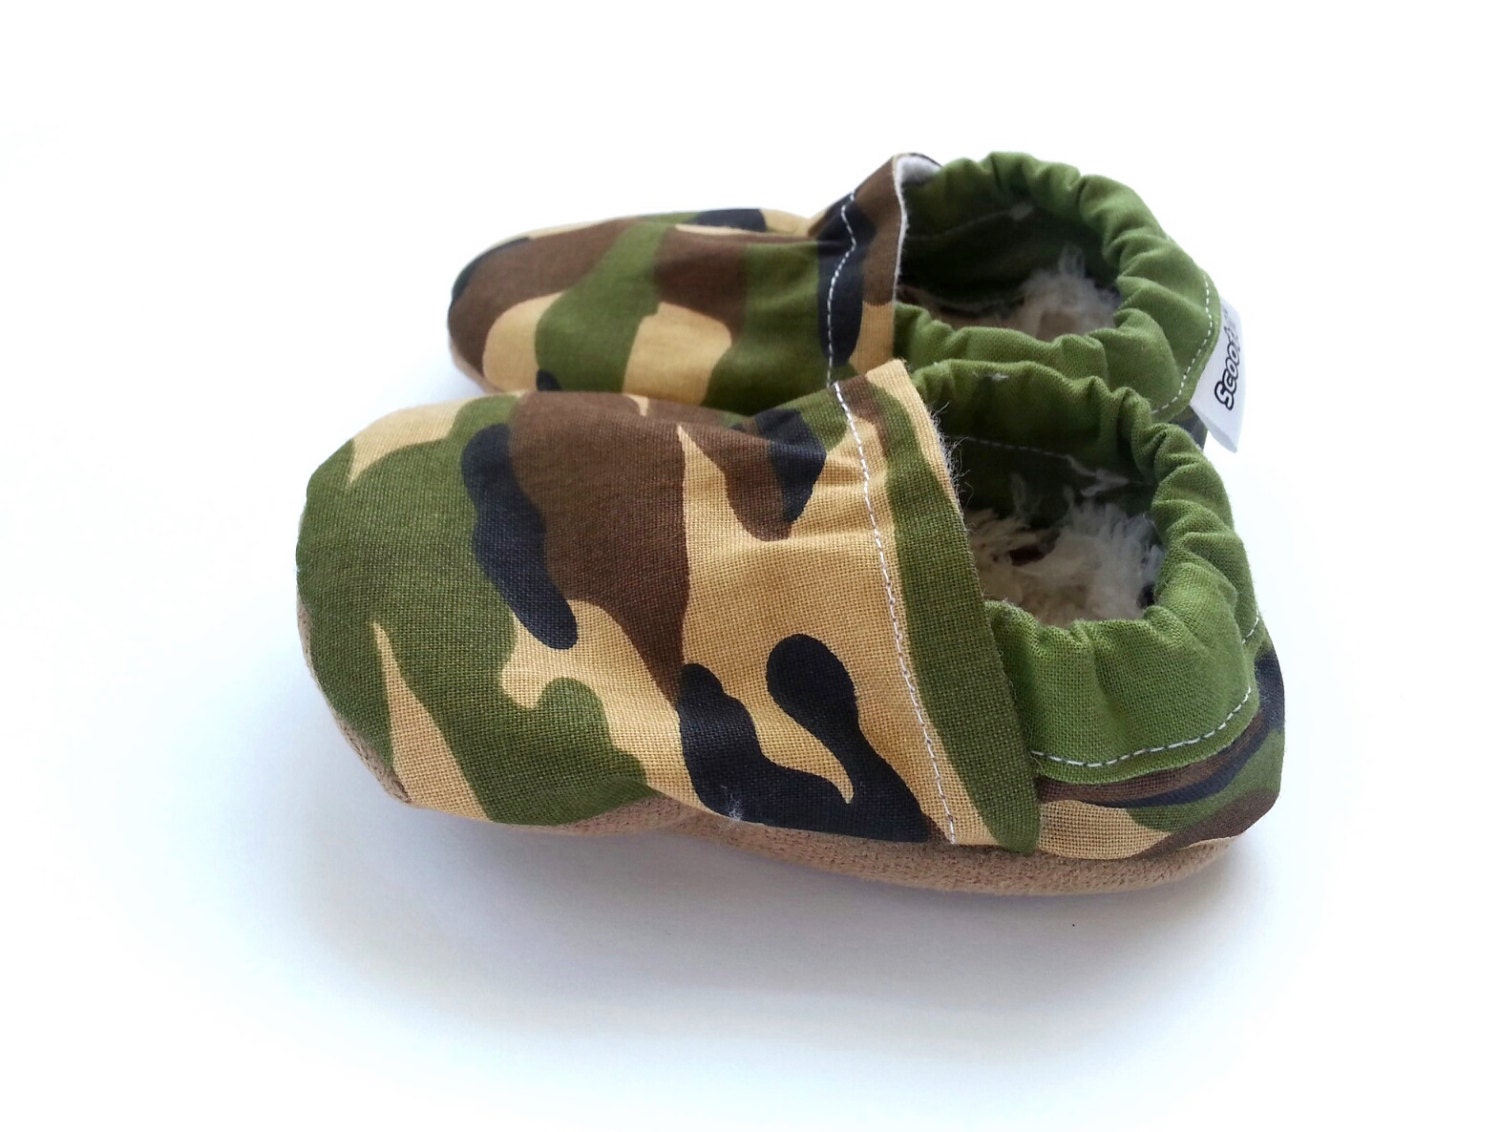 army baby shoes Baby Boy shoes camouflage shoes by ScooterBooties